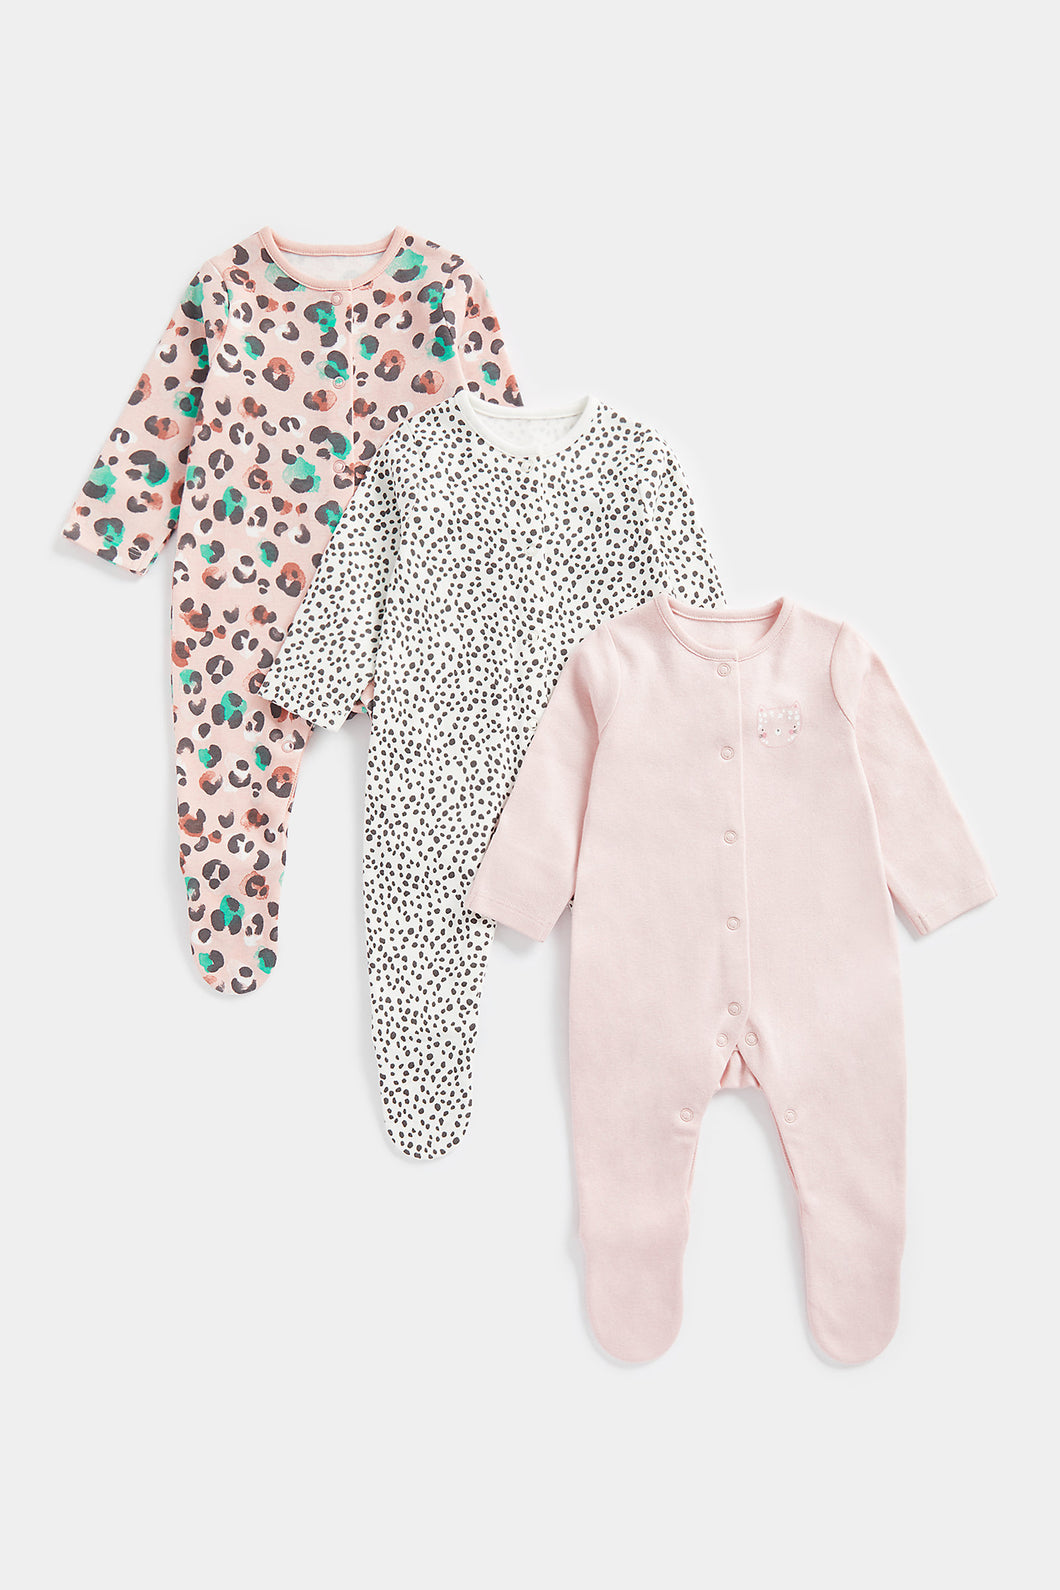 Mothercare Playful Baby Sleepsuits - 3 Pack